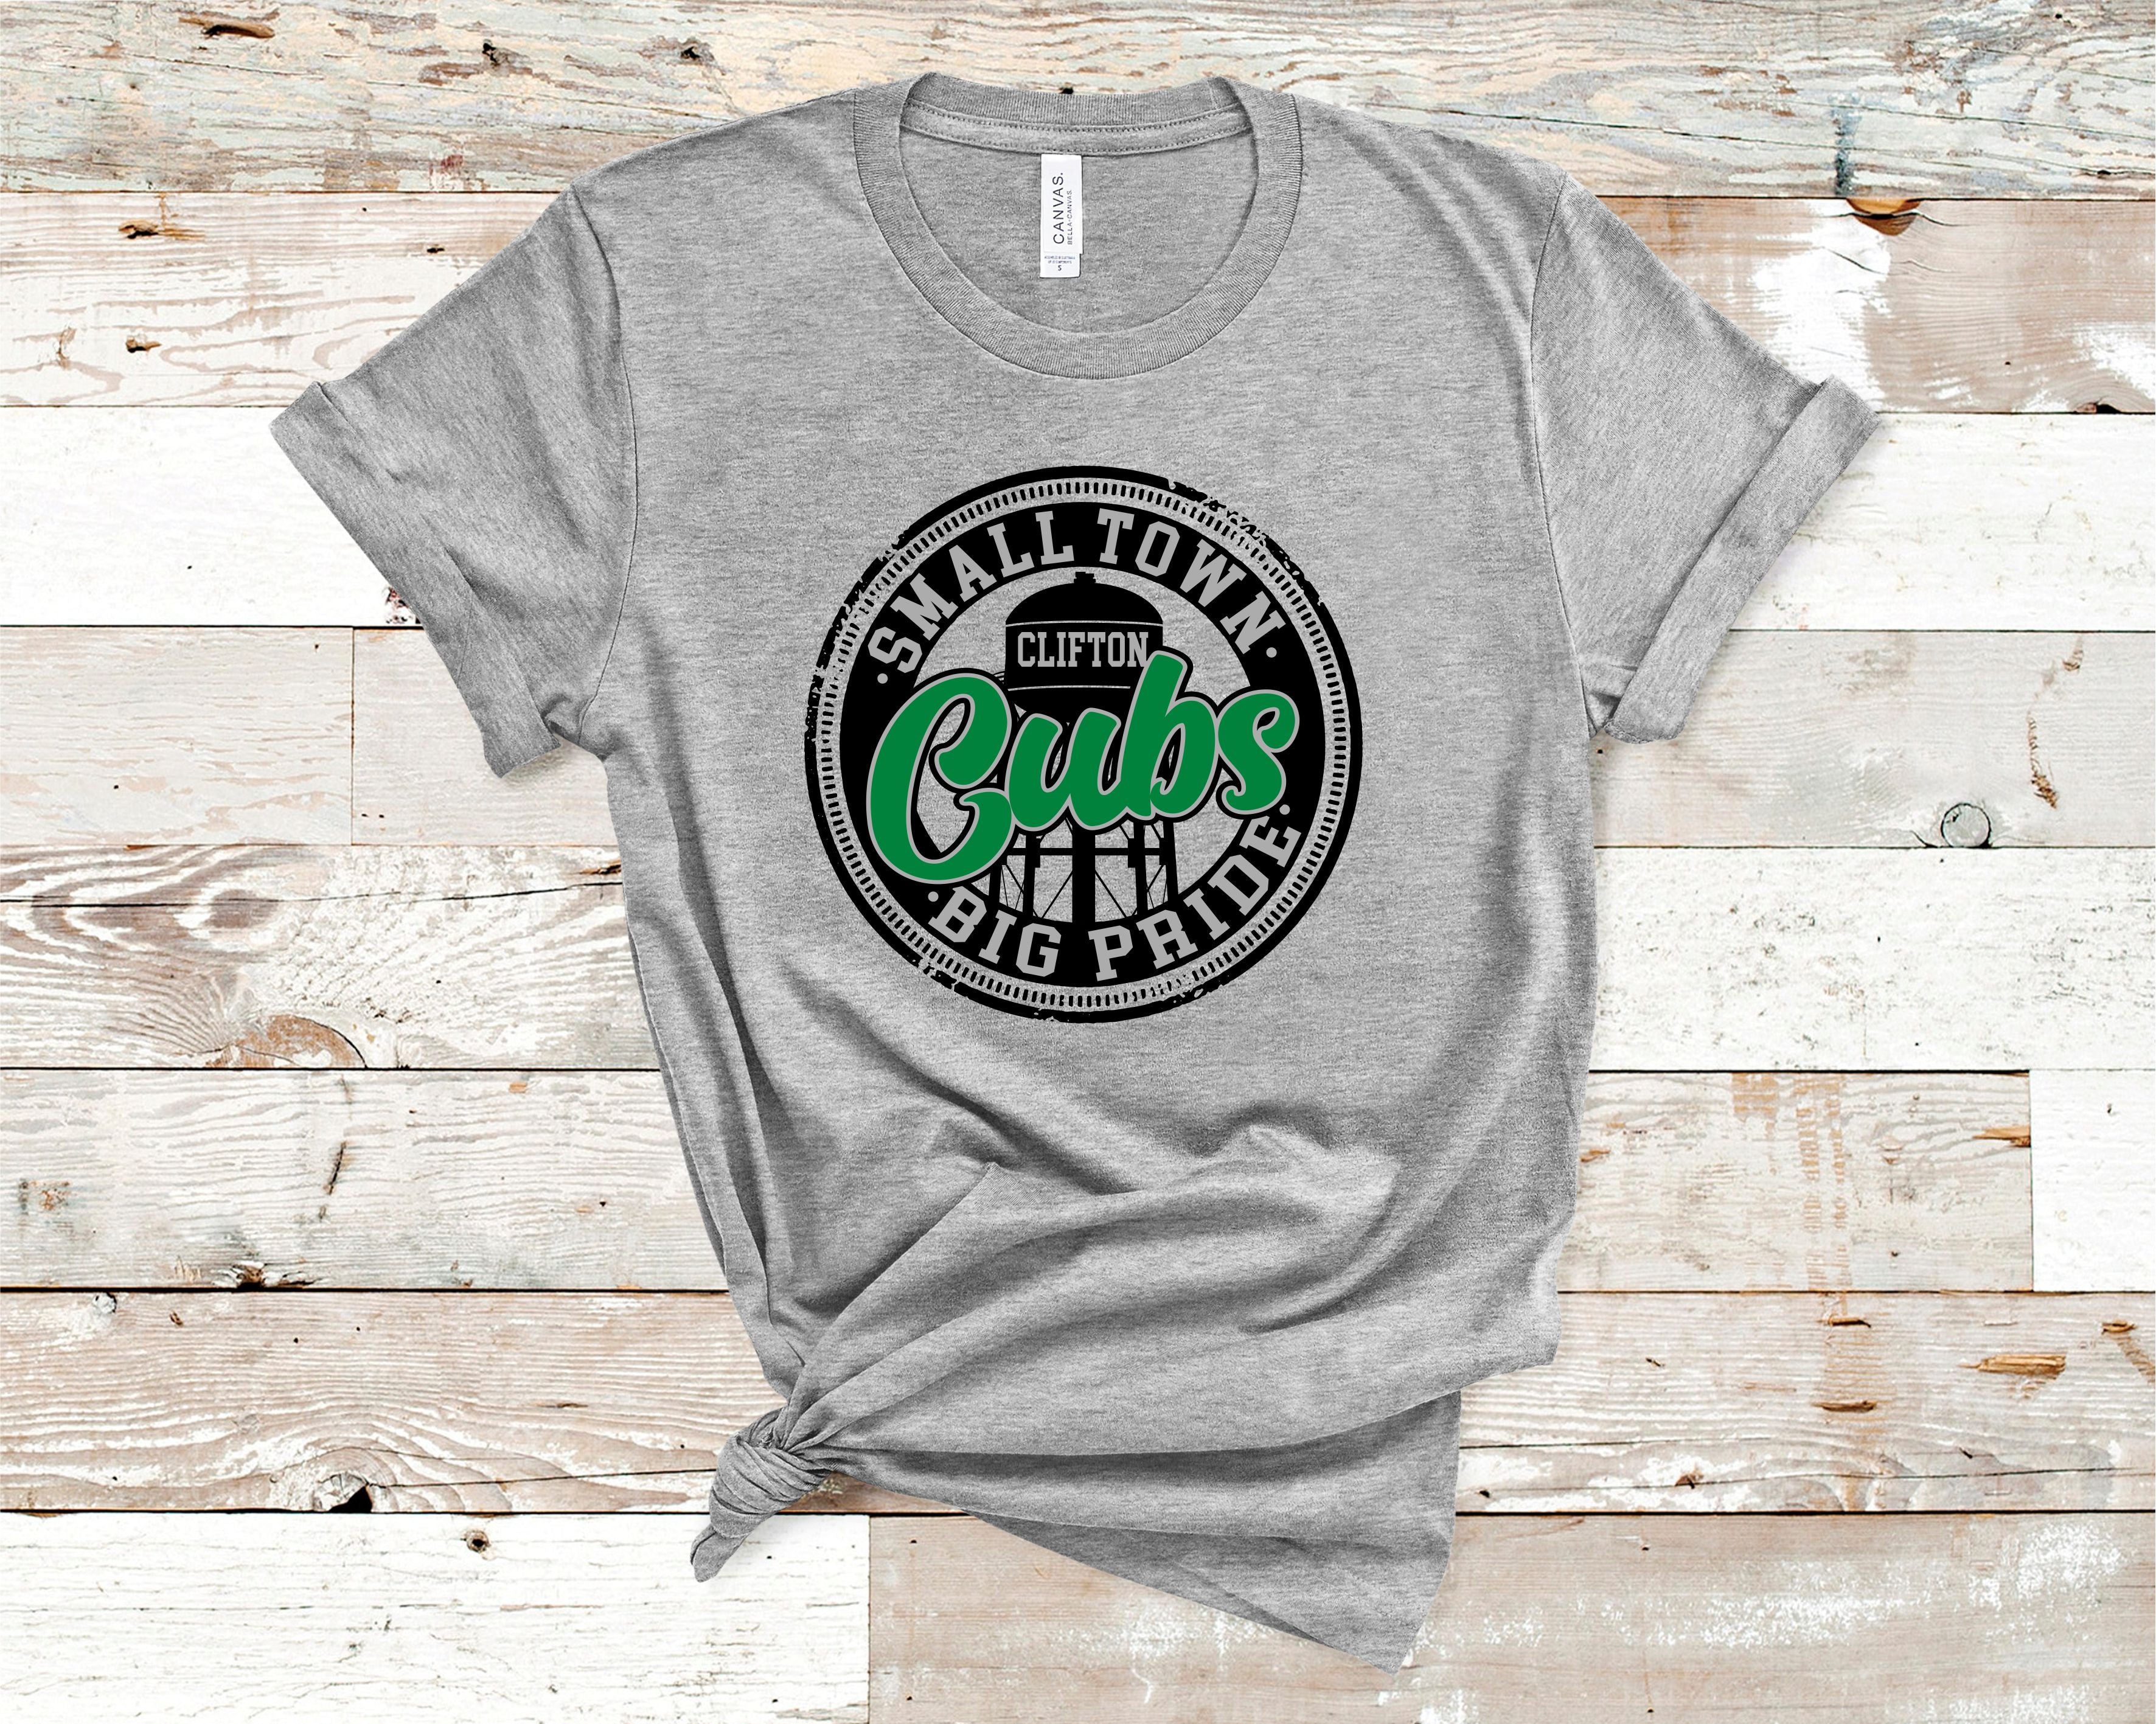 Small Town, Big Pride - Clifton Cubs – Small Town Tees - Mexia